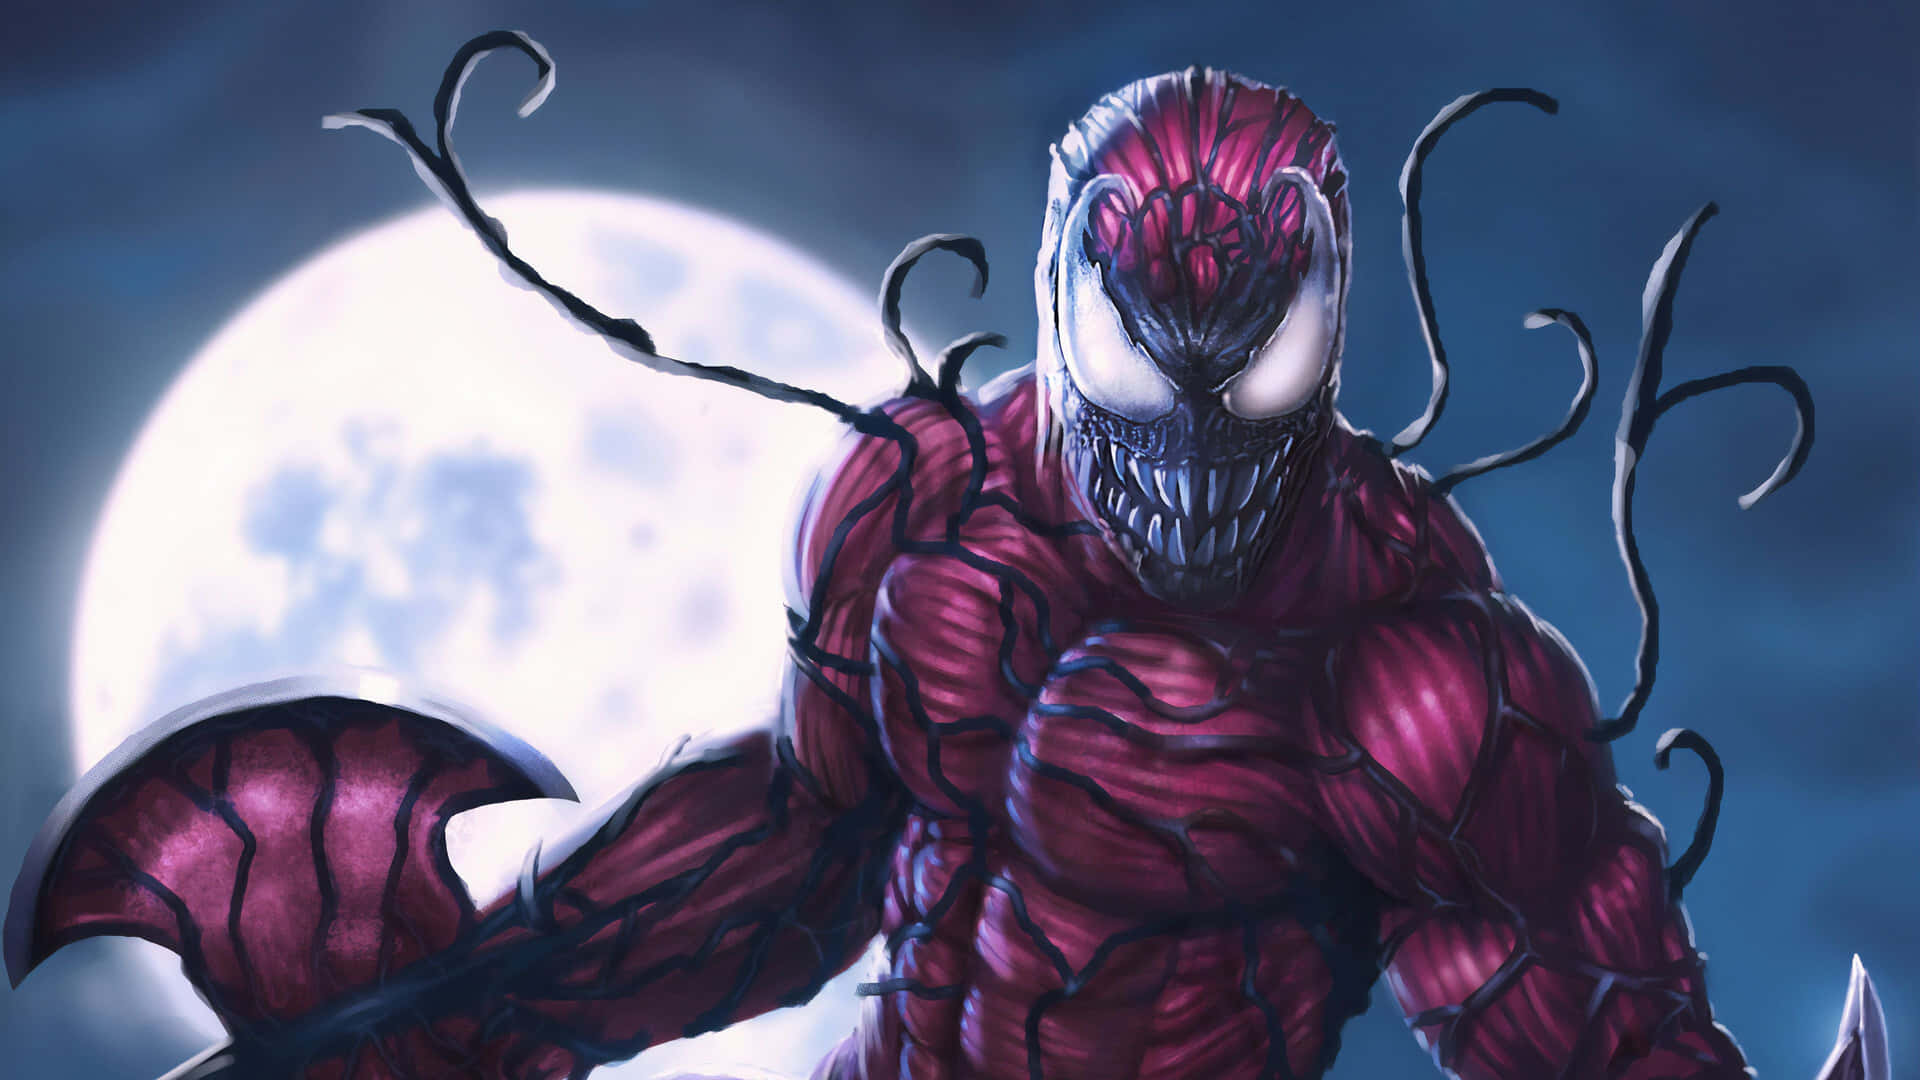 Spider Carnage - A menacing and thrilling action scene. Wallpaper